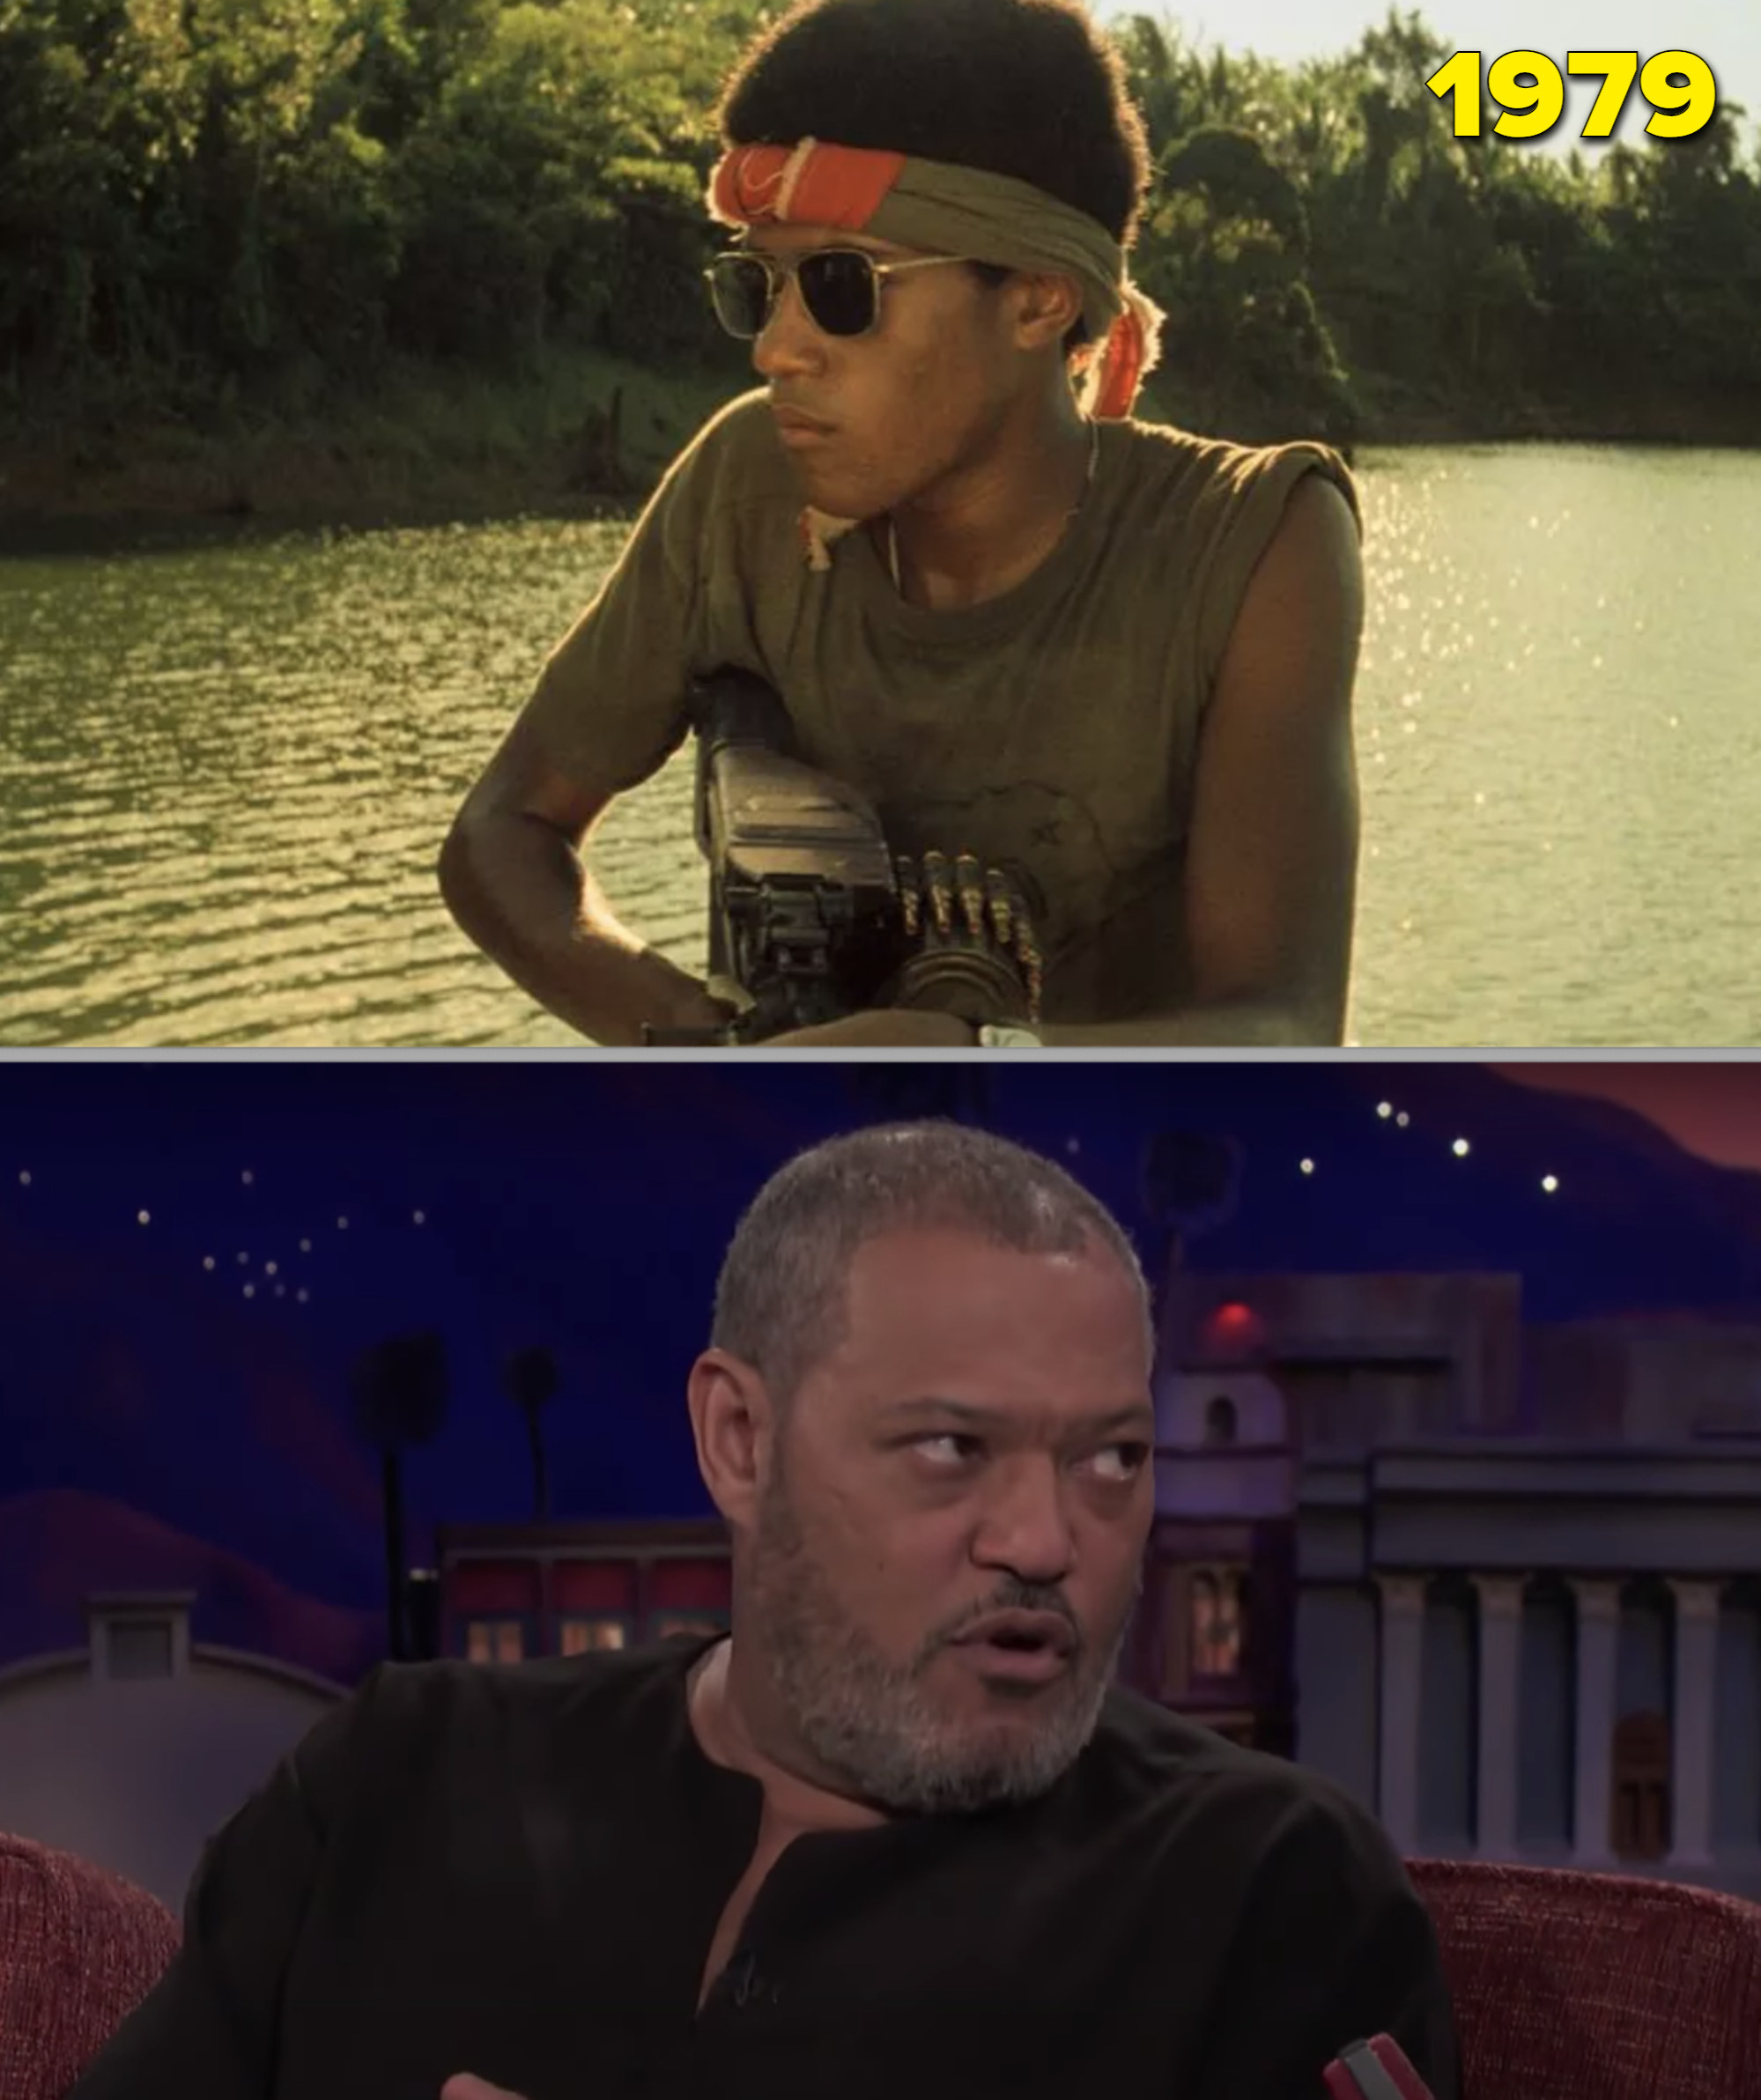 Laurence Fishburne in &quot;Apocalypse Now&quot; holding a machine gun vs. him being interviewed in 2018